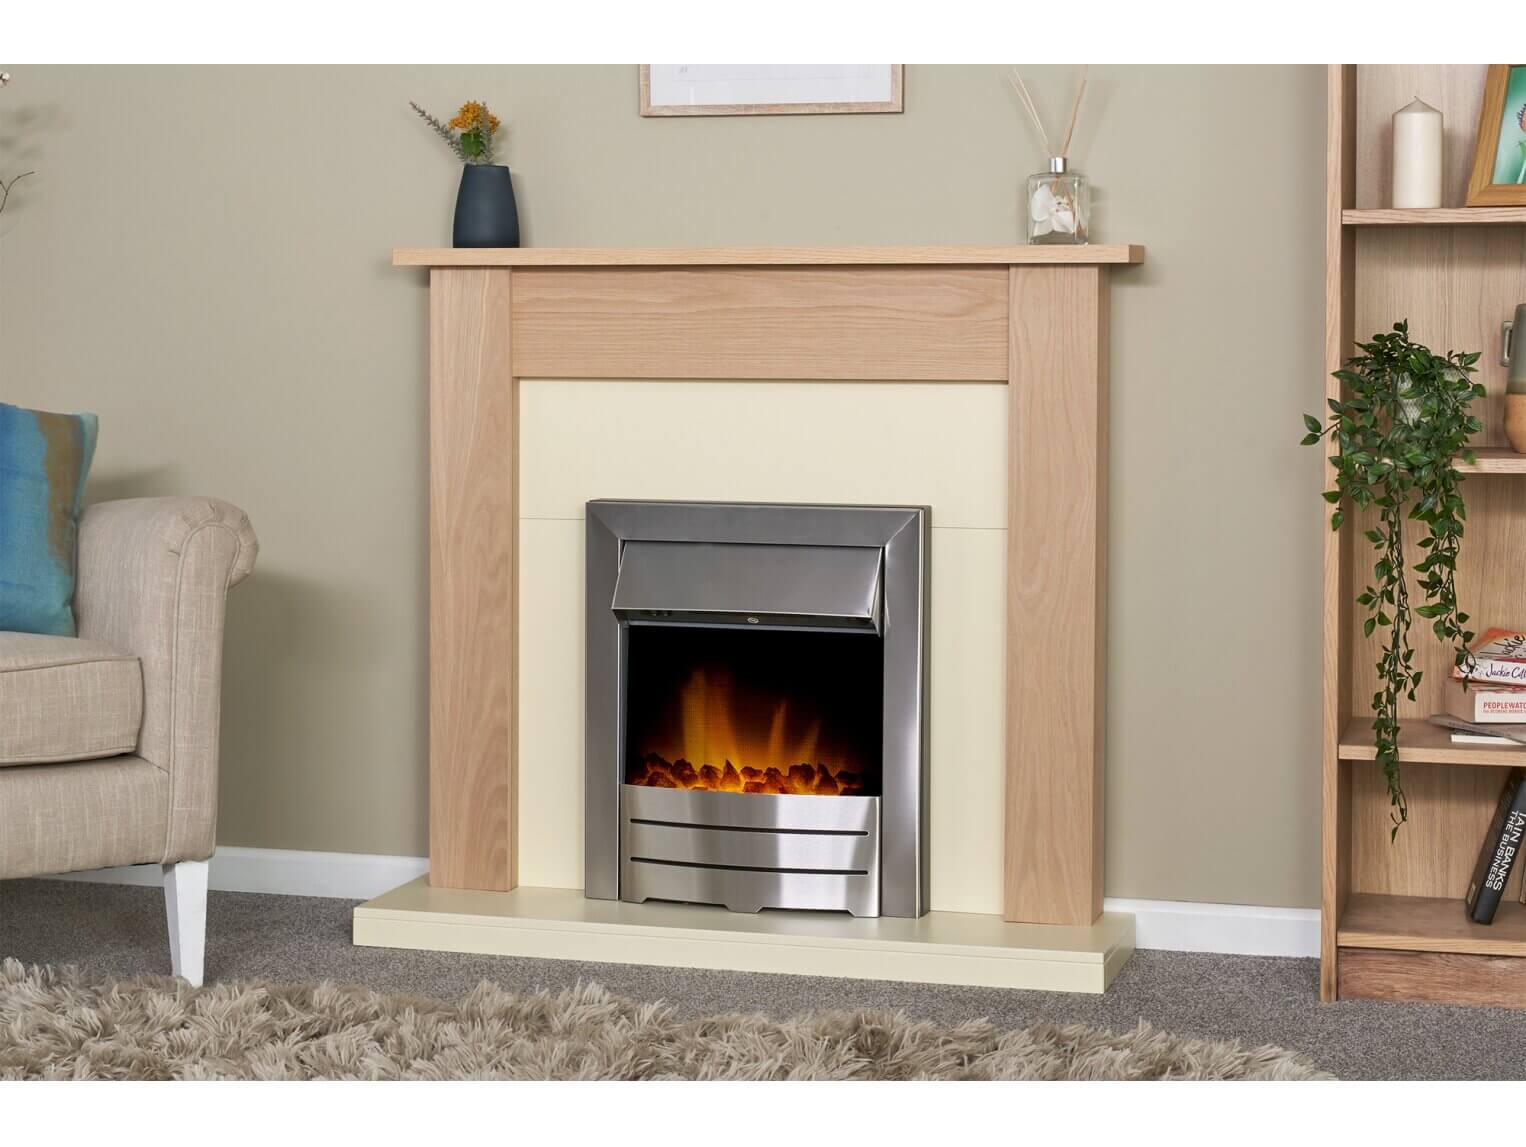 Adam Southwold Fireplace in Oak & Cream with Colorado Electric Fire in Brushed Steel - Glowing Flames